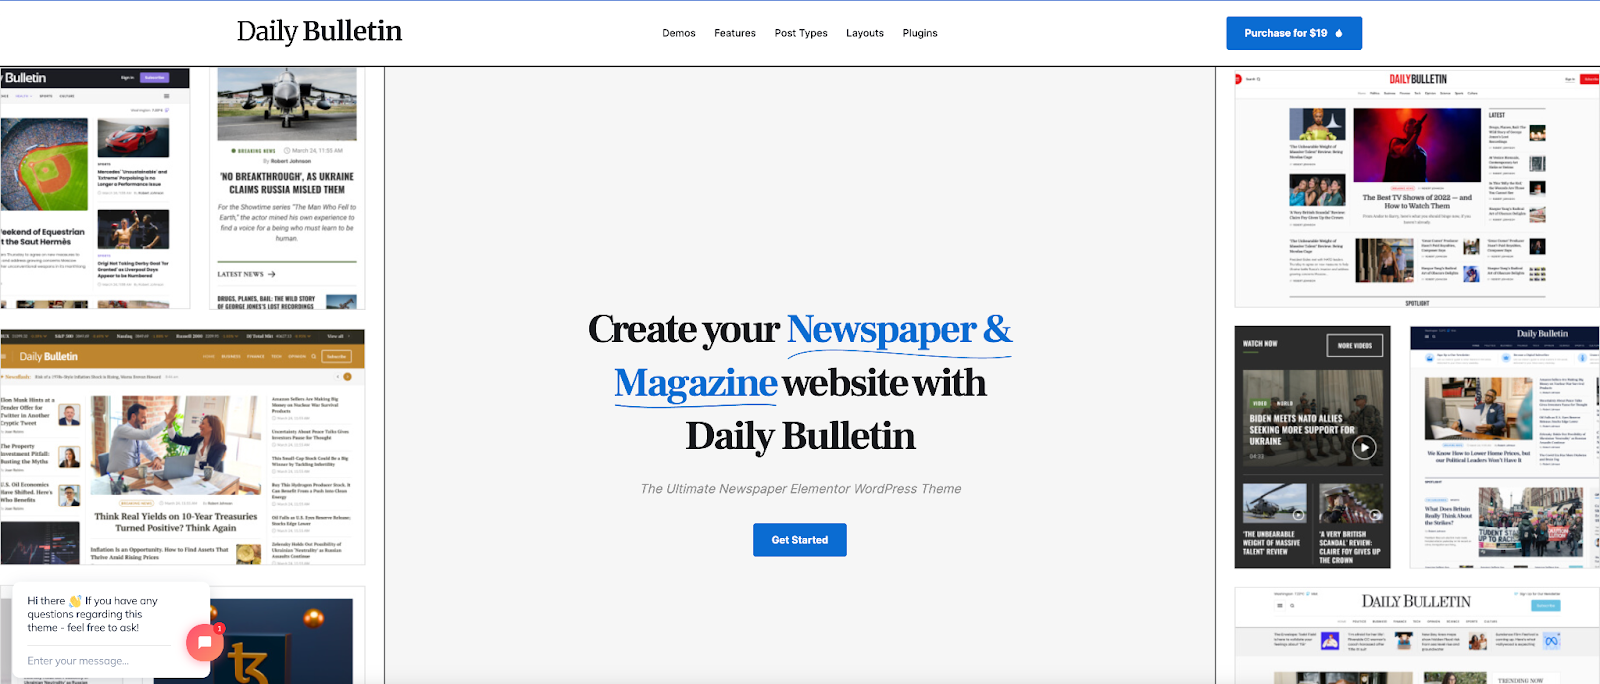 Get a daily news site in no time flat with Daily Bulletin, and enjoy full blog features on WordPress